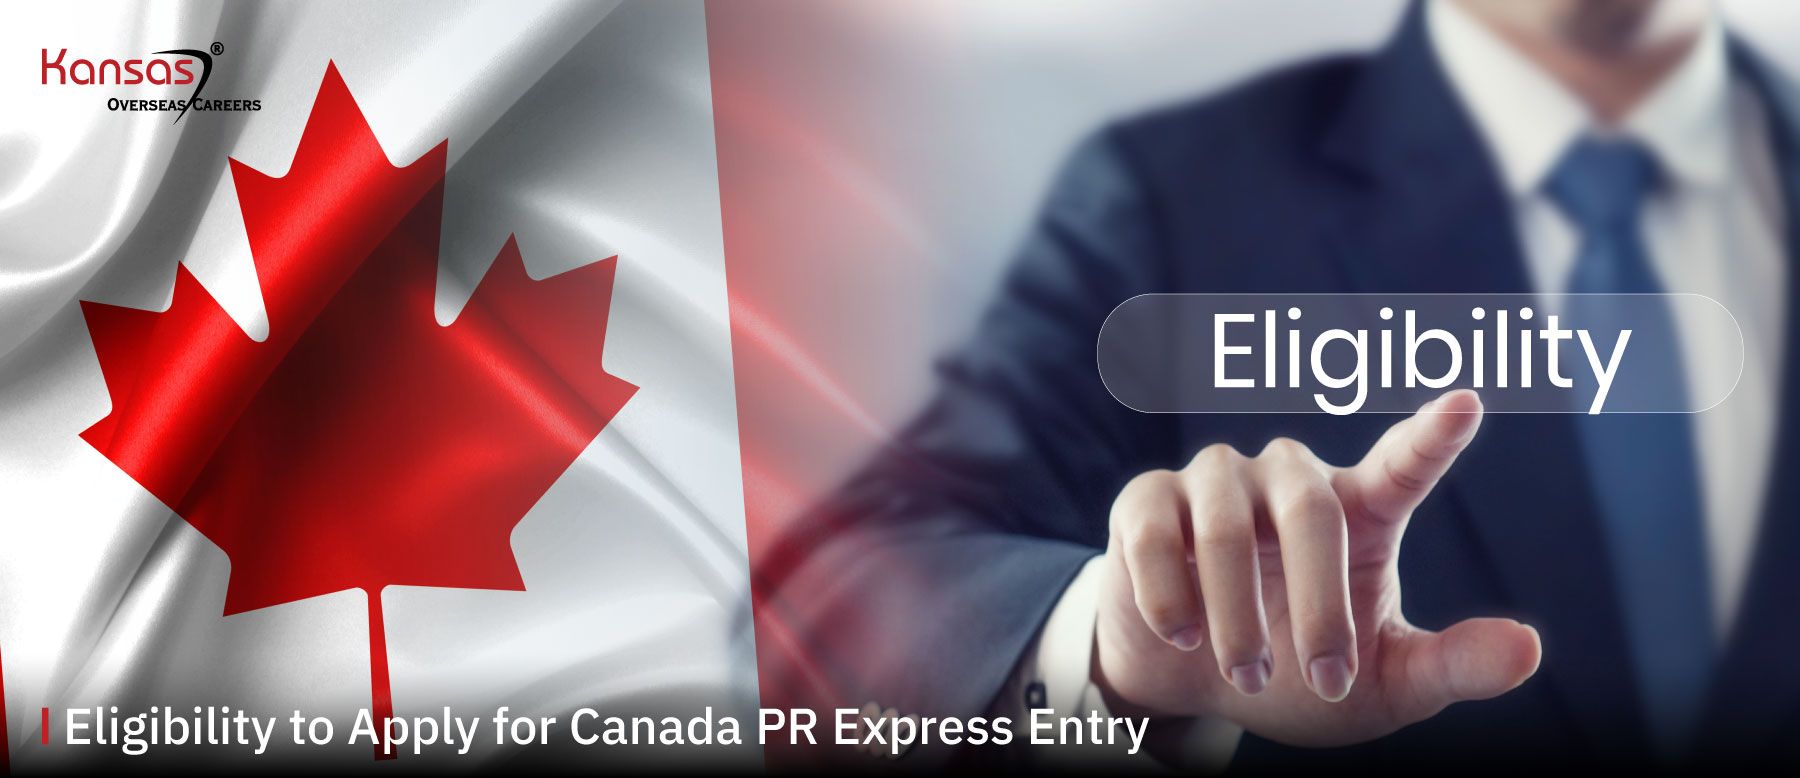 Eligibility-to-Apply-for-Canada-PR-Express-Entry